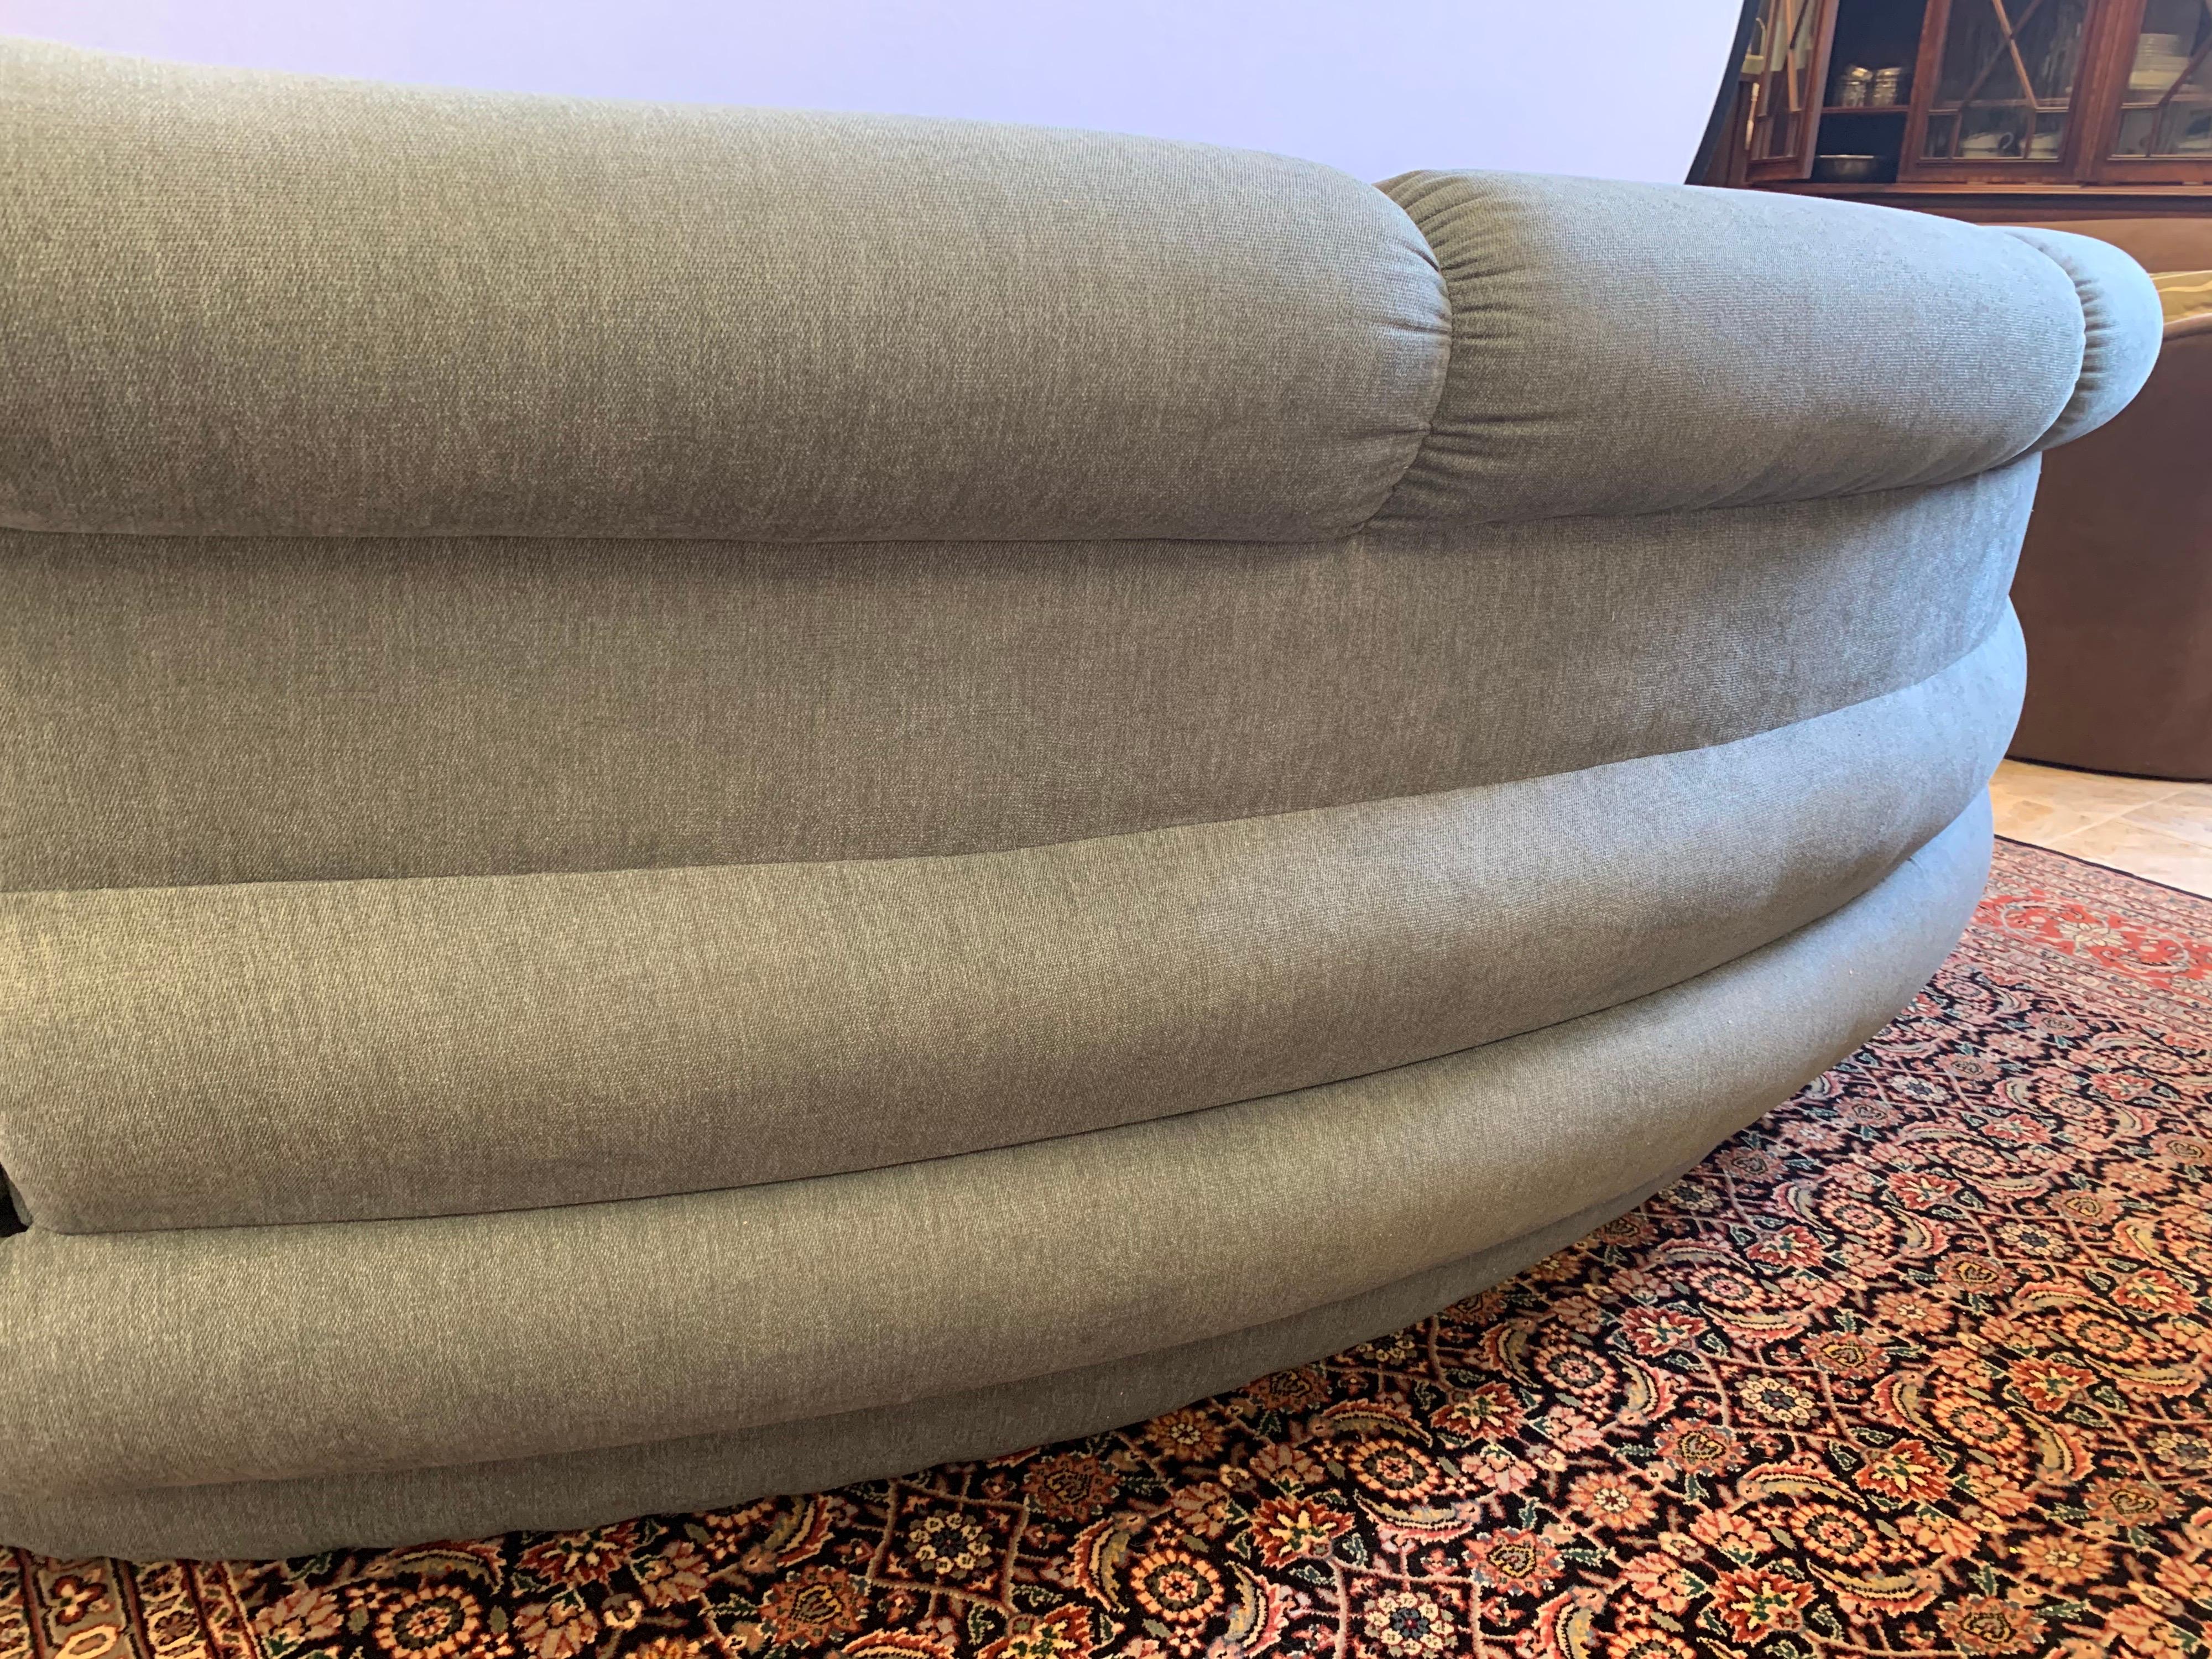 Matching Pearsall Comfort Design Cloud Sofas New Upholstered in Slate Gray, Pair 1